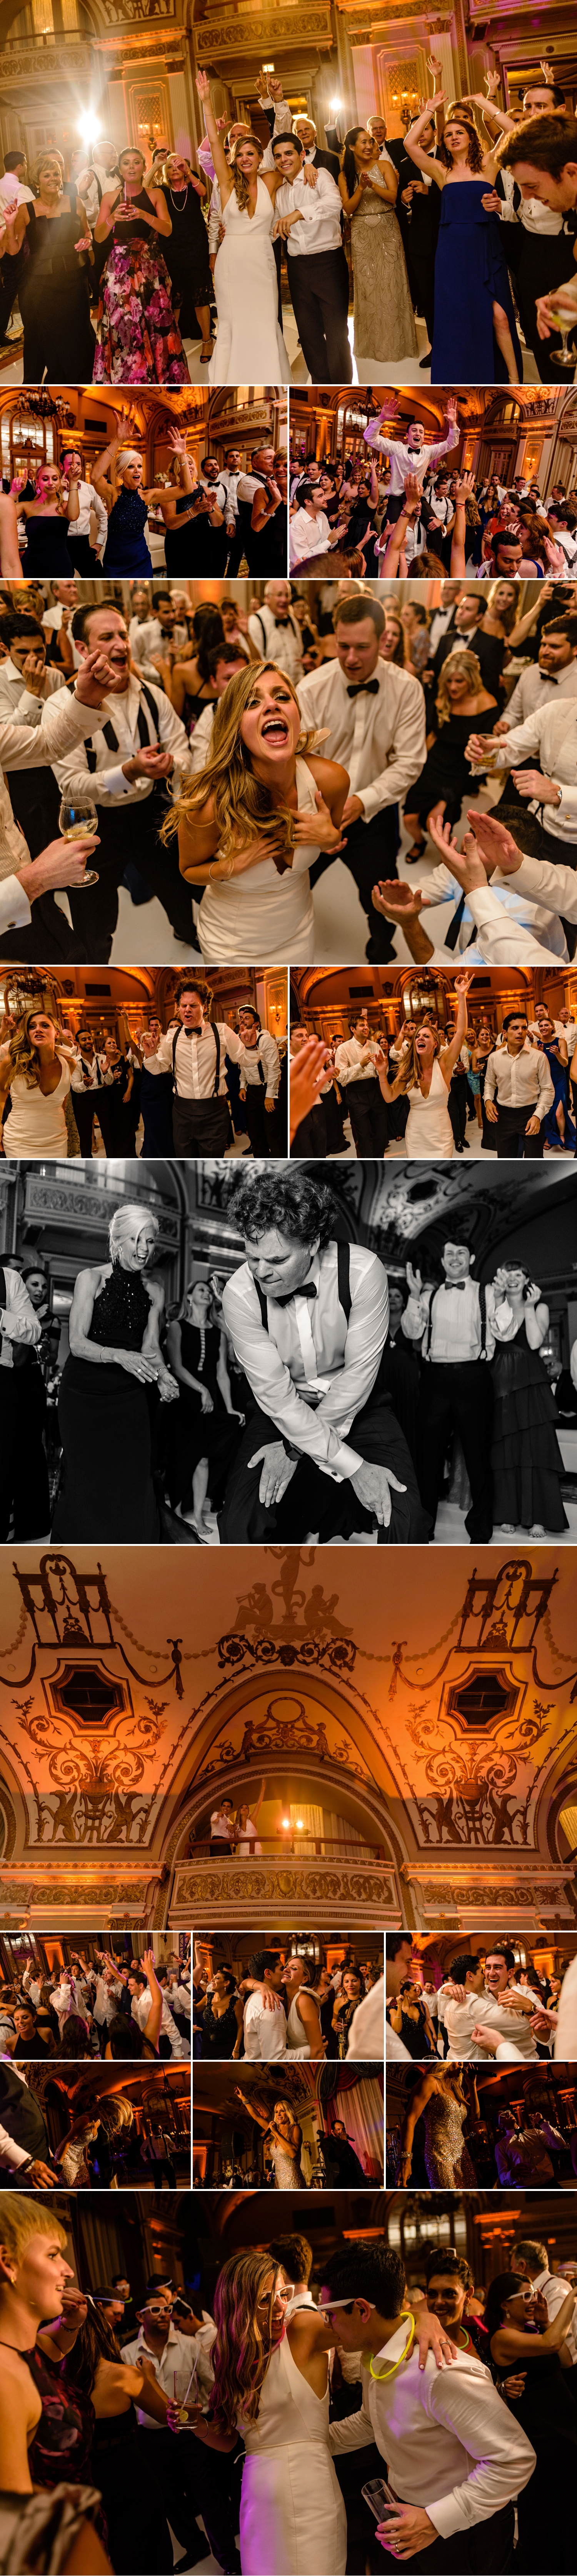 photos of candid bride and groom moments on the dance floor during a jewish wedding at the chateau laurier wedding in ottawa ontario